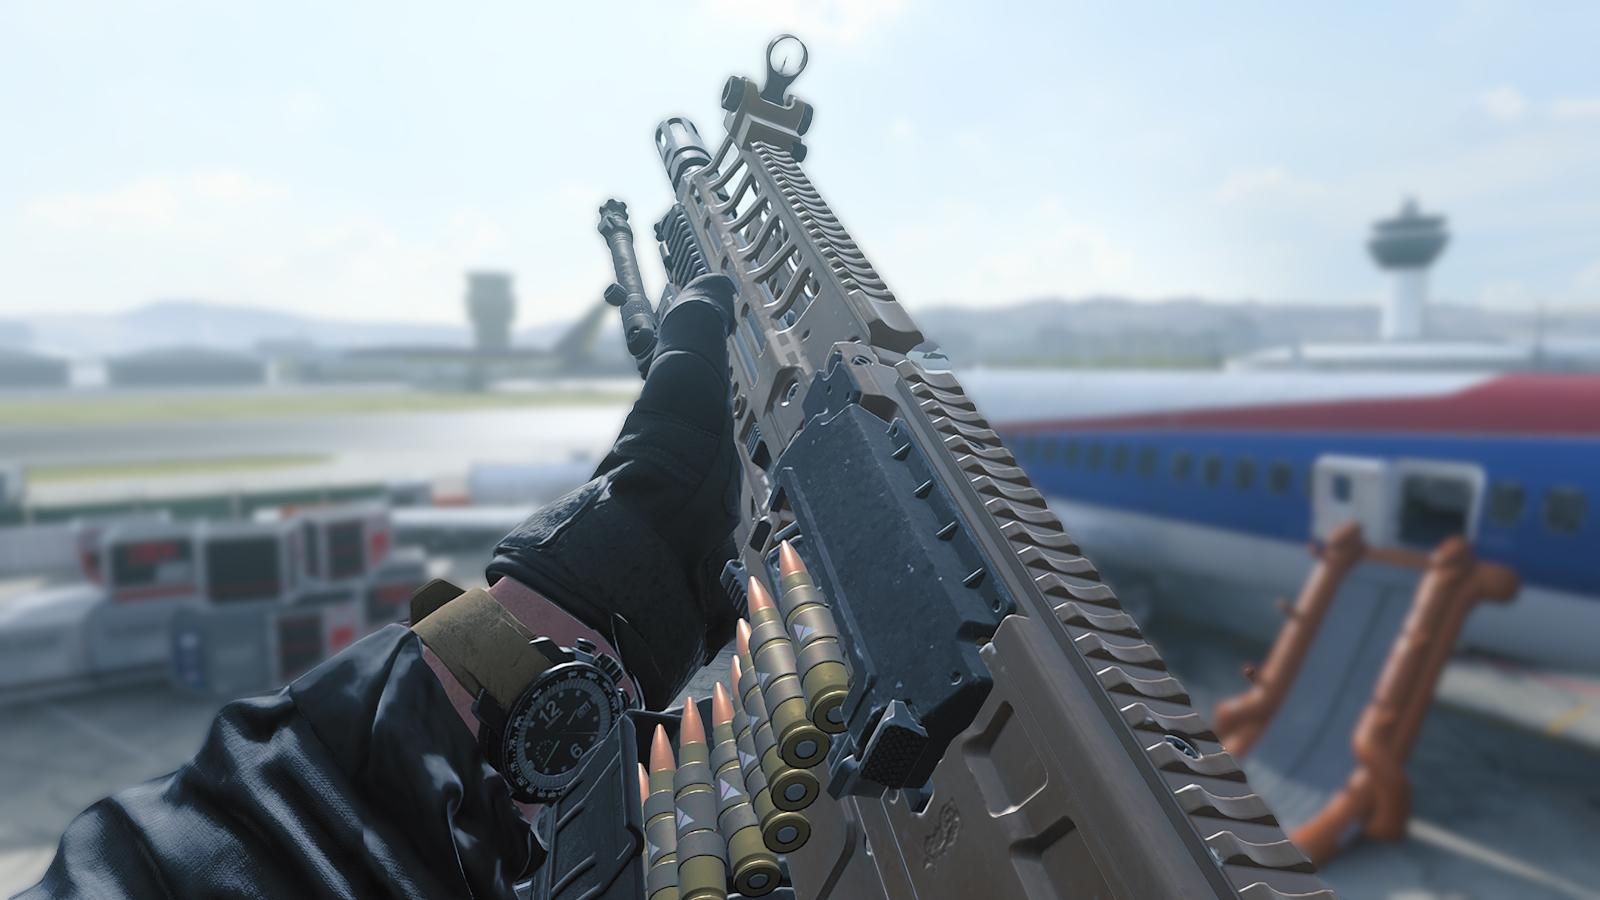 TAQ Evolvere LMG being inspected on MW3 Terminal multiplayer map.